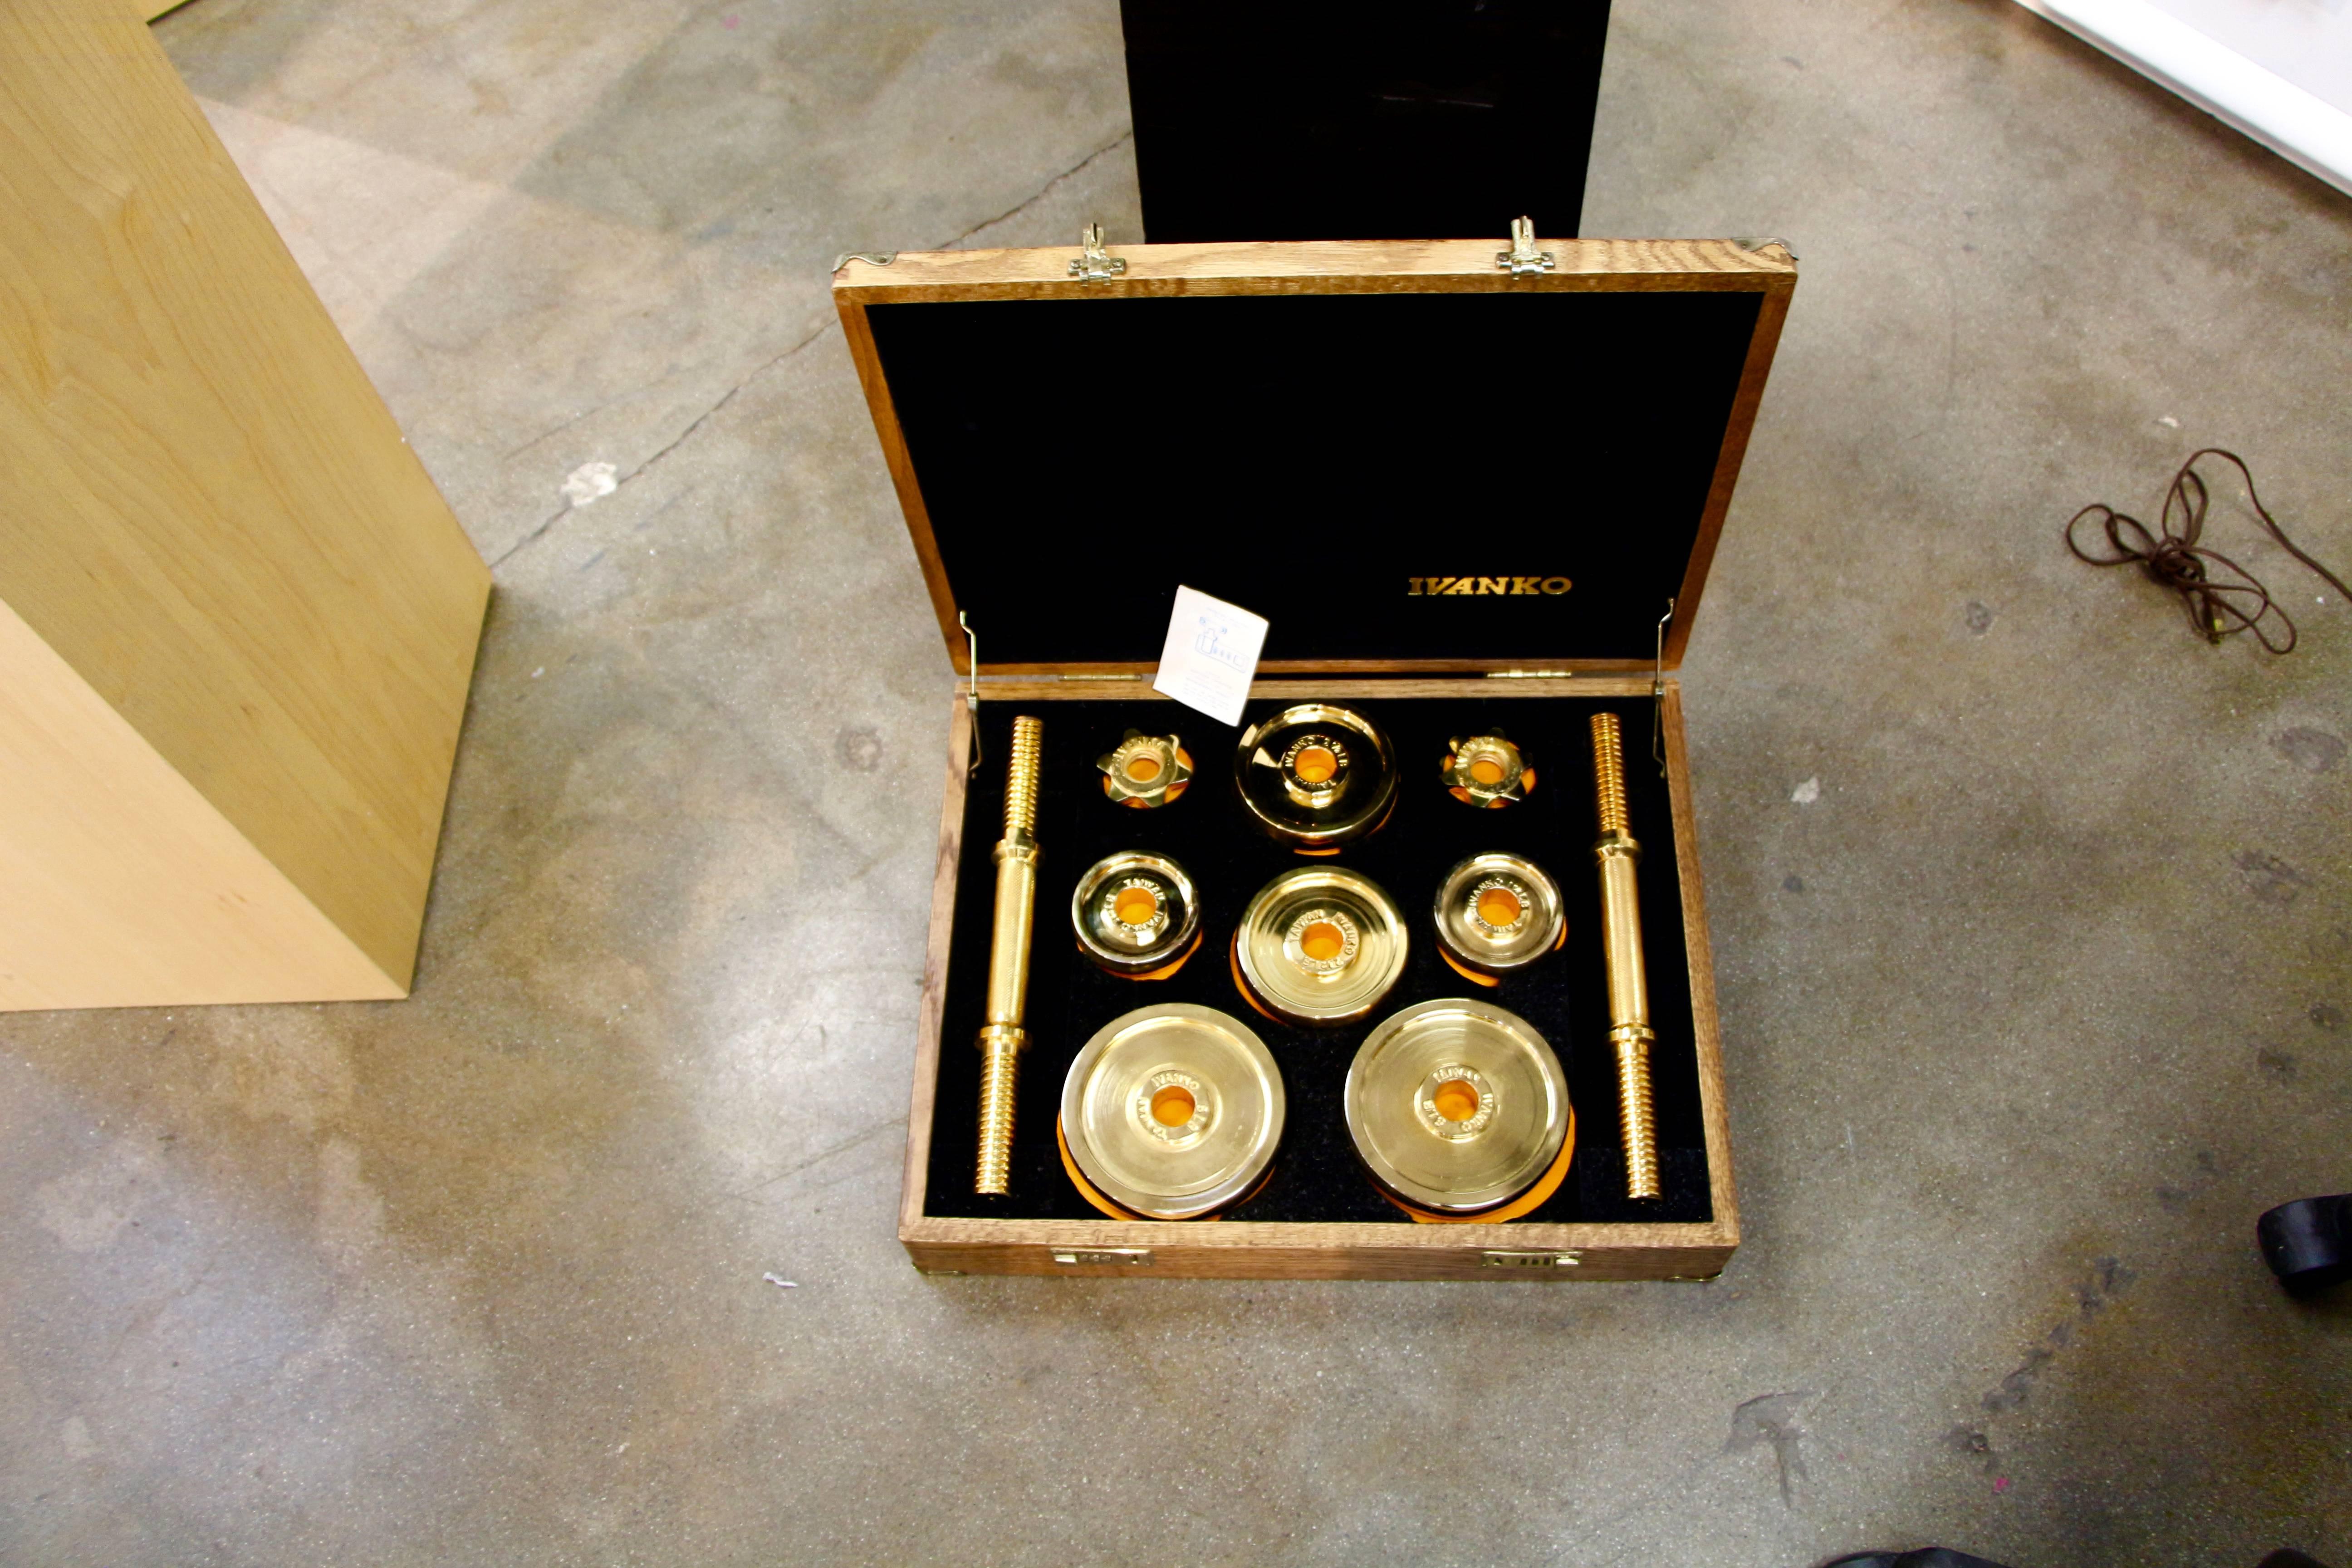 A limited edited Ivanko weight set plated in 22-karat gold made in a limited run in the early 1980s. There are four 5-pound weights, four 2.5-pound weights, four 1.25-pound weights, holders and barbells. The box is in nice condition, with some minor